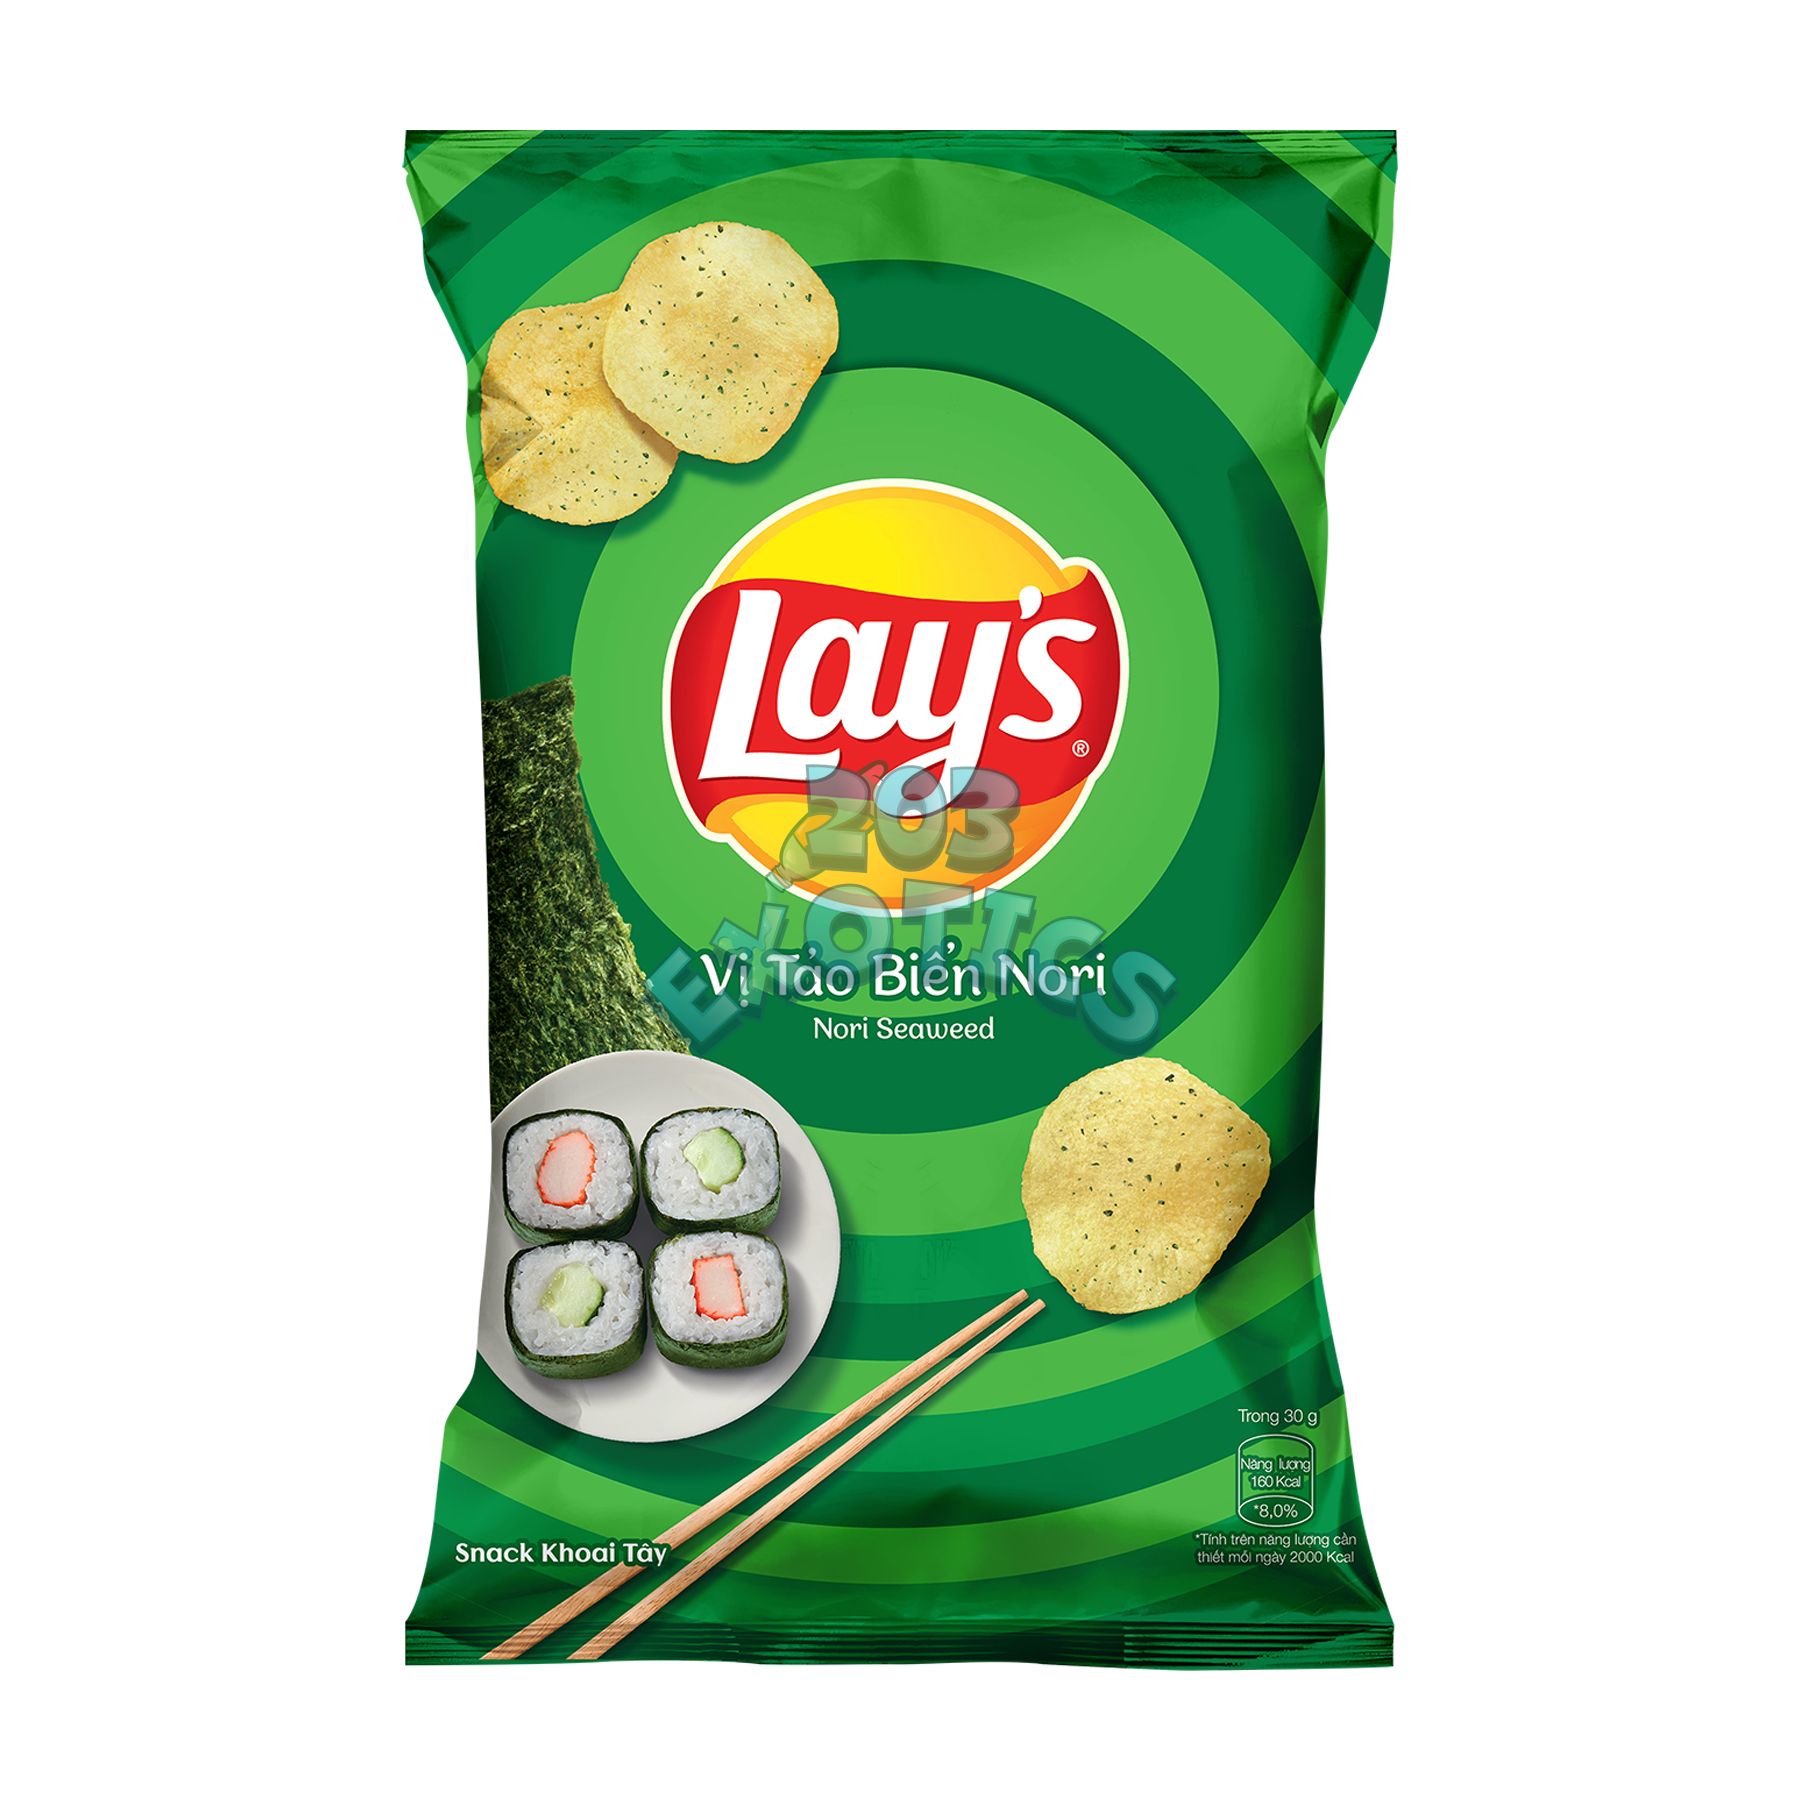 Lays Nori Seaweed Flavored Chips (44G)